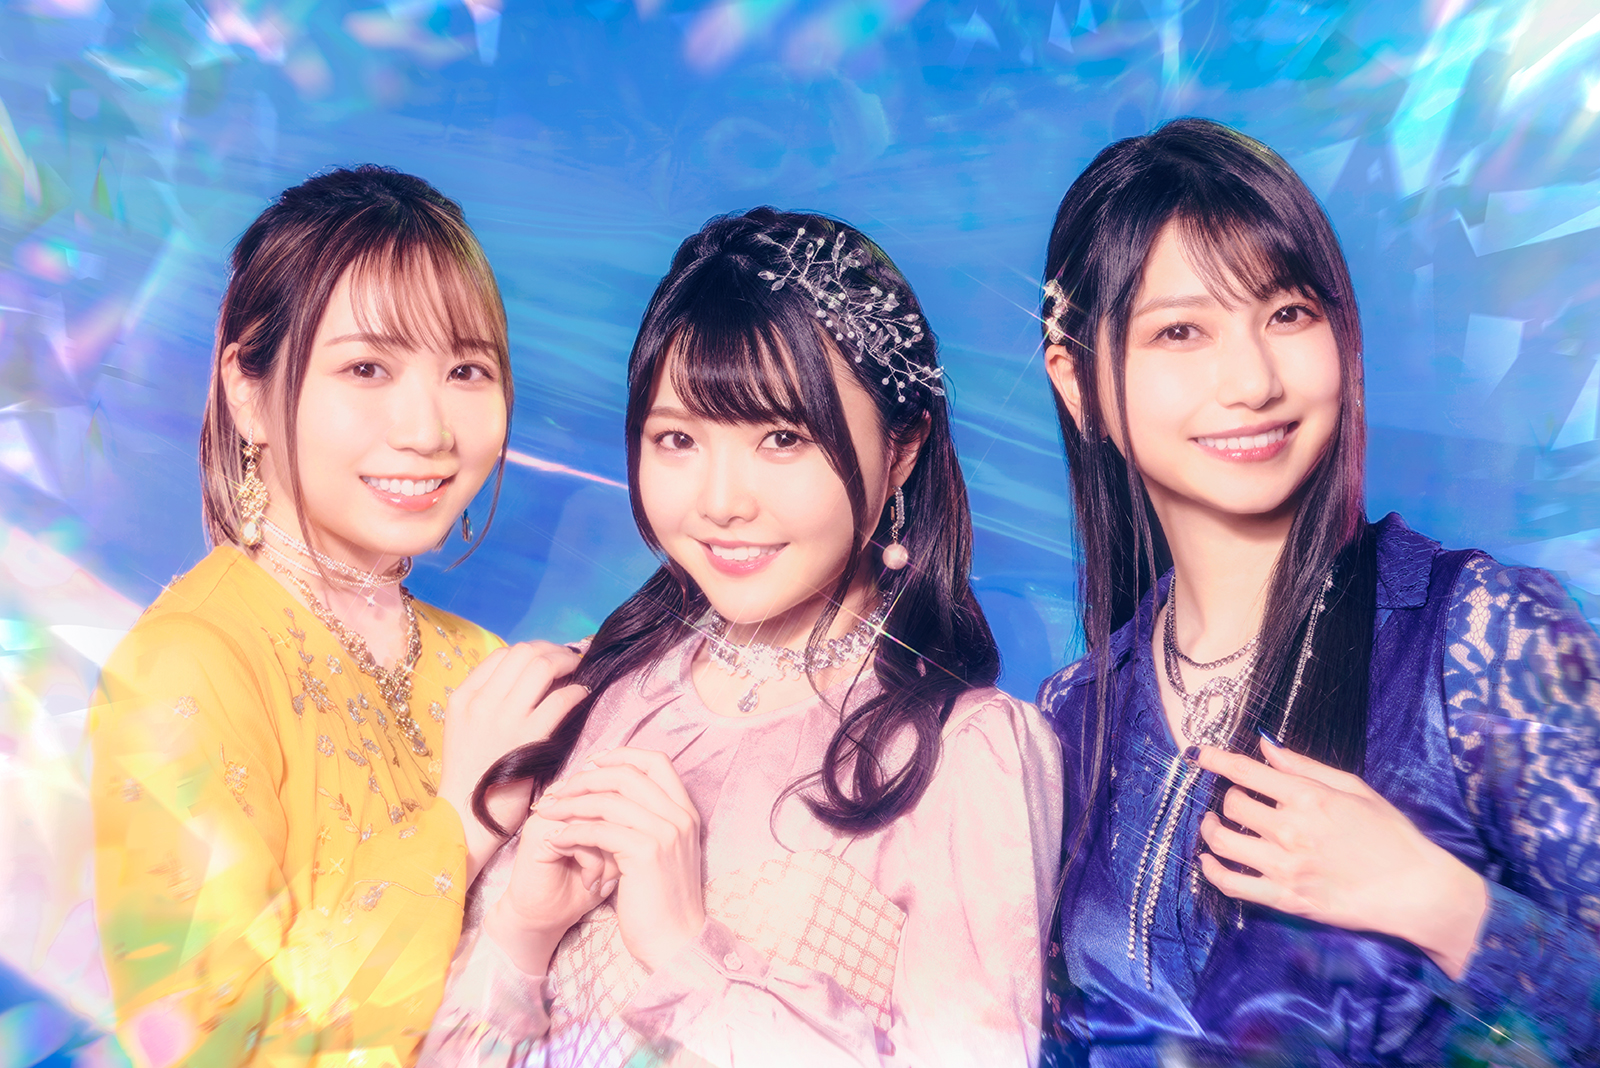 TrySail、全国ツアー追加公演のタイトル＆ロゴ決定！LAWSON presents TrySail Live Tour 2023 Special Edition “SuperBlooooom”は9月30日（土）・10月1日（日）開催 - 画像一覧（2/2）